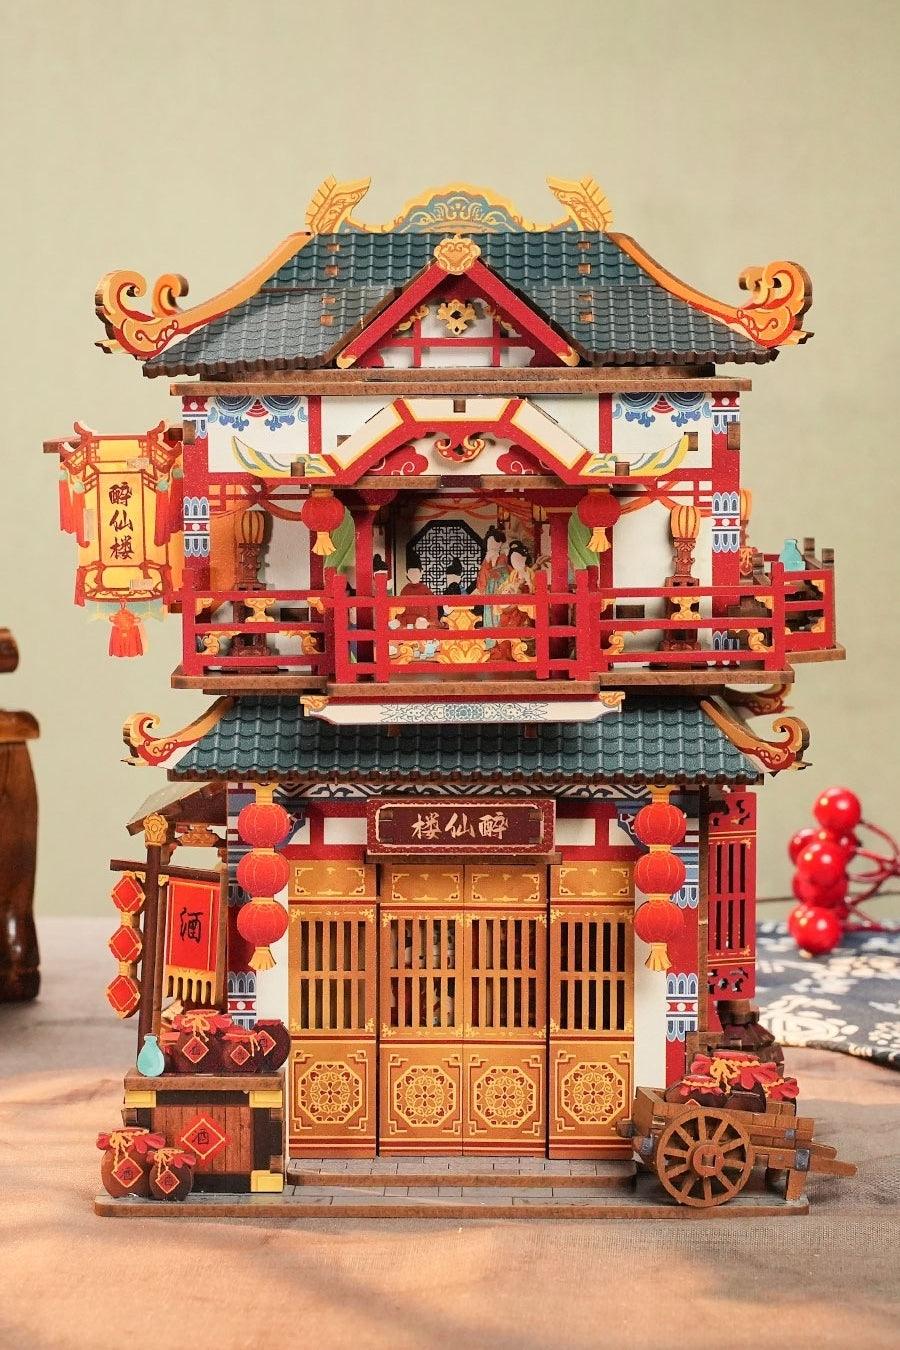 ancient Chinese restaurant themed diy 3D wooden puzzles for adults - front size view